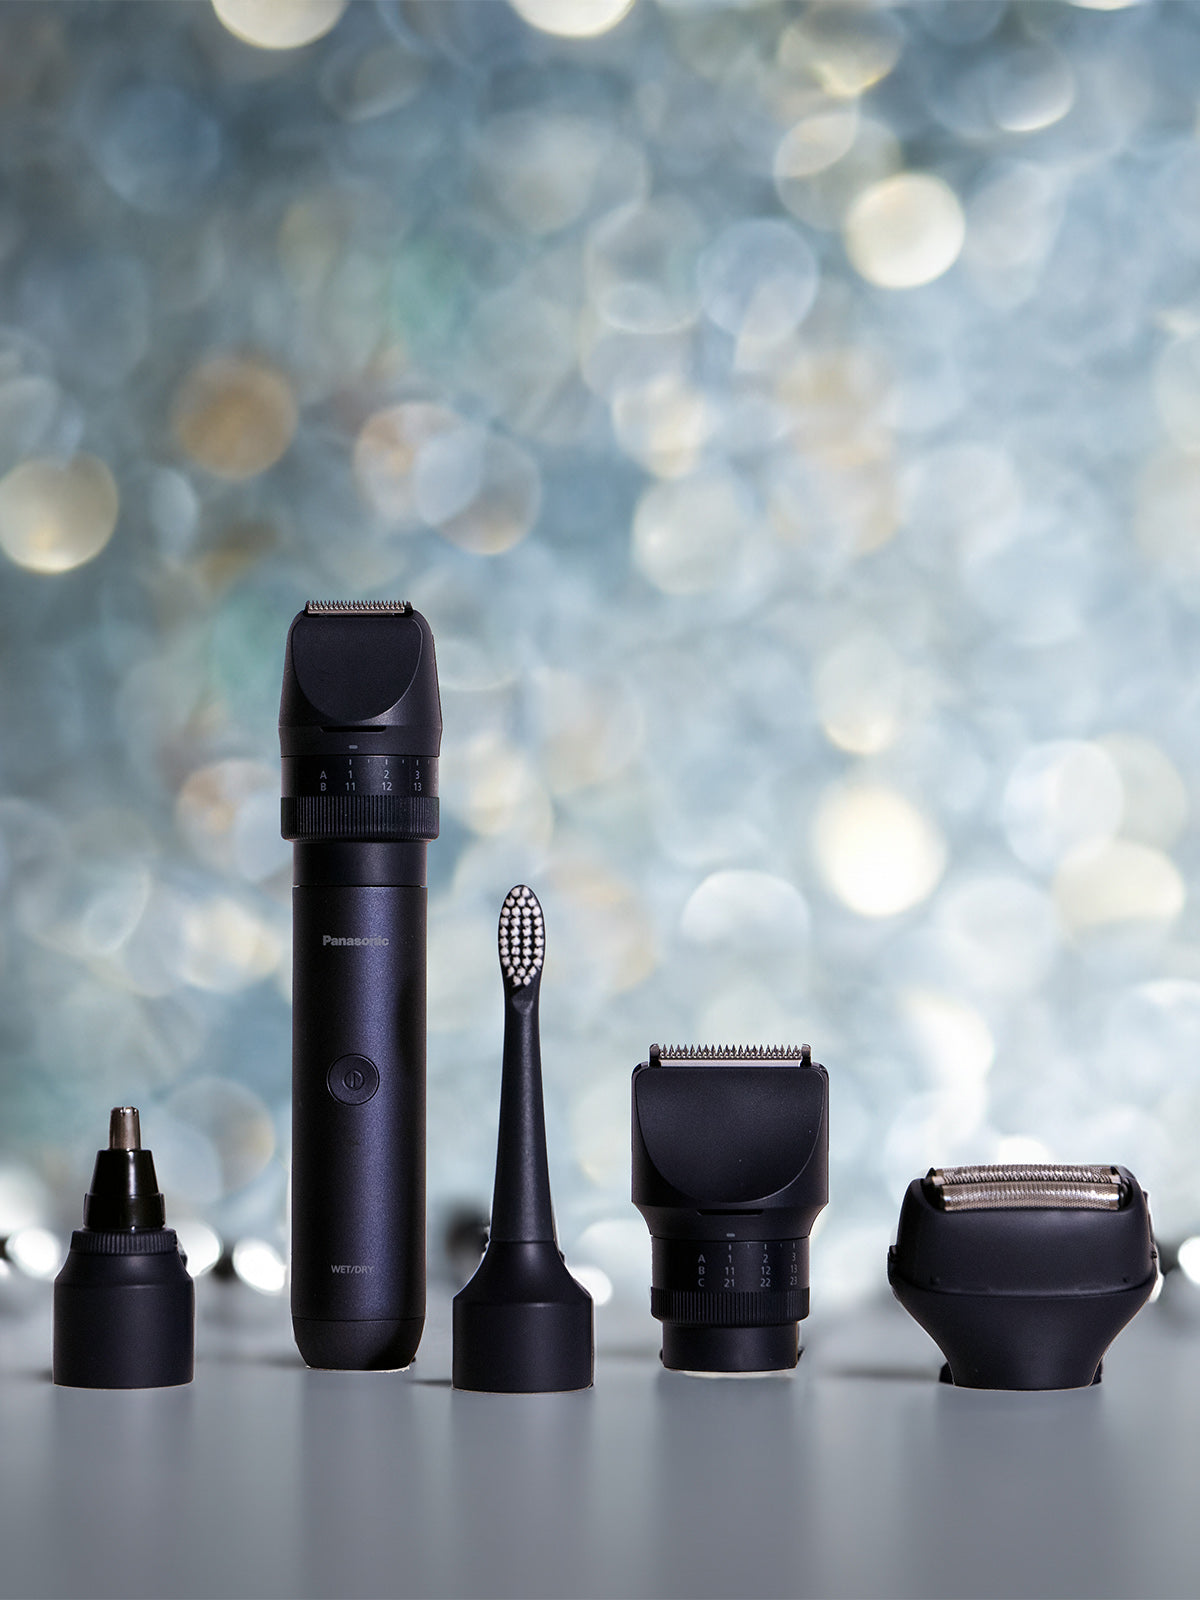 The Panasonic MultiShape Ultimate Kit is the perfect luxury gifts for men